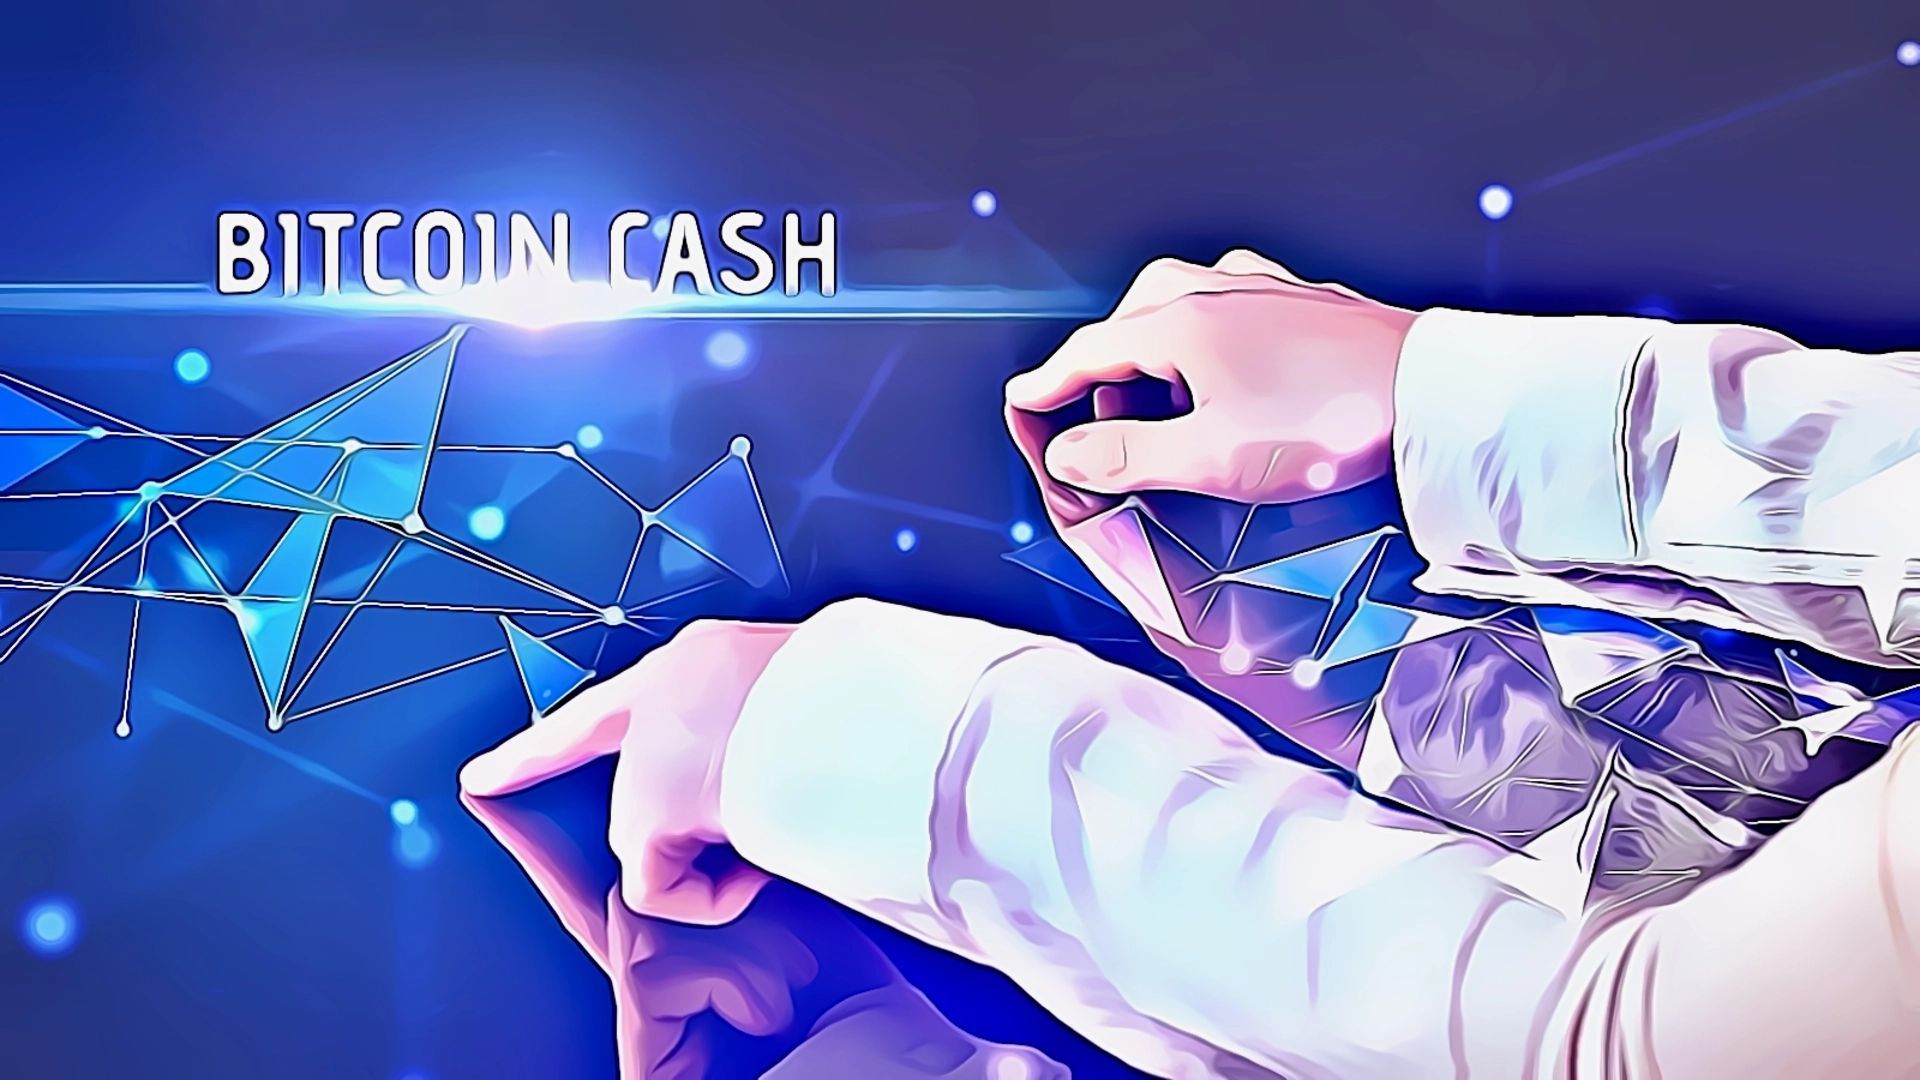 BITCOIN CASH PRICE ANALYSIS & PREDICTION (April 13) – BCH Tests Minor Support Amid Bloodbath, Potential Recovery?